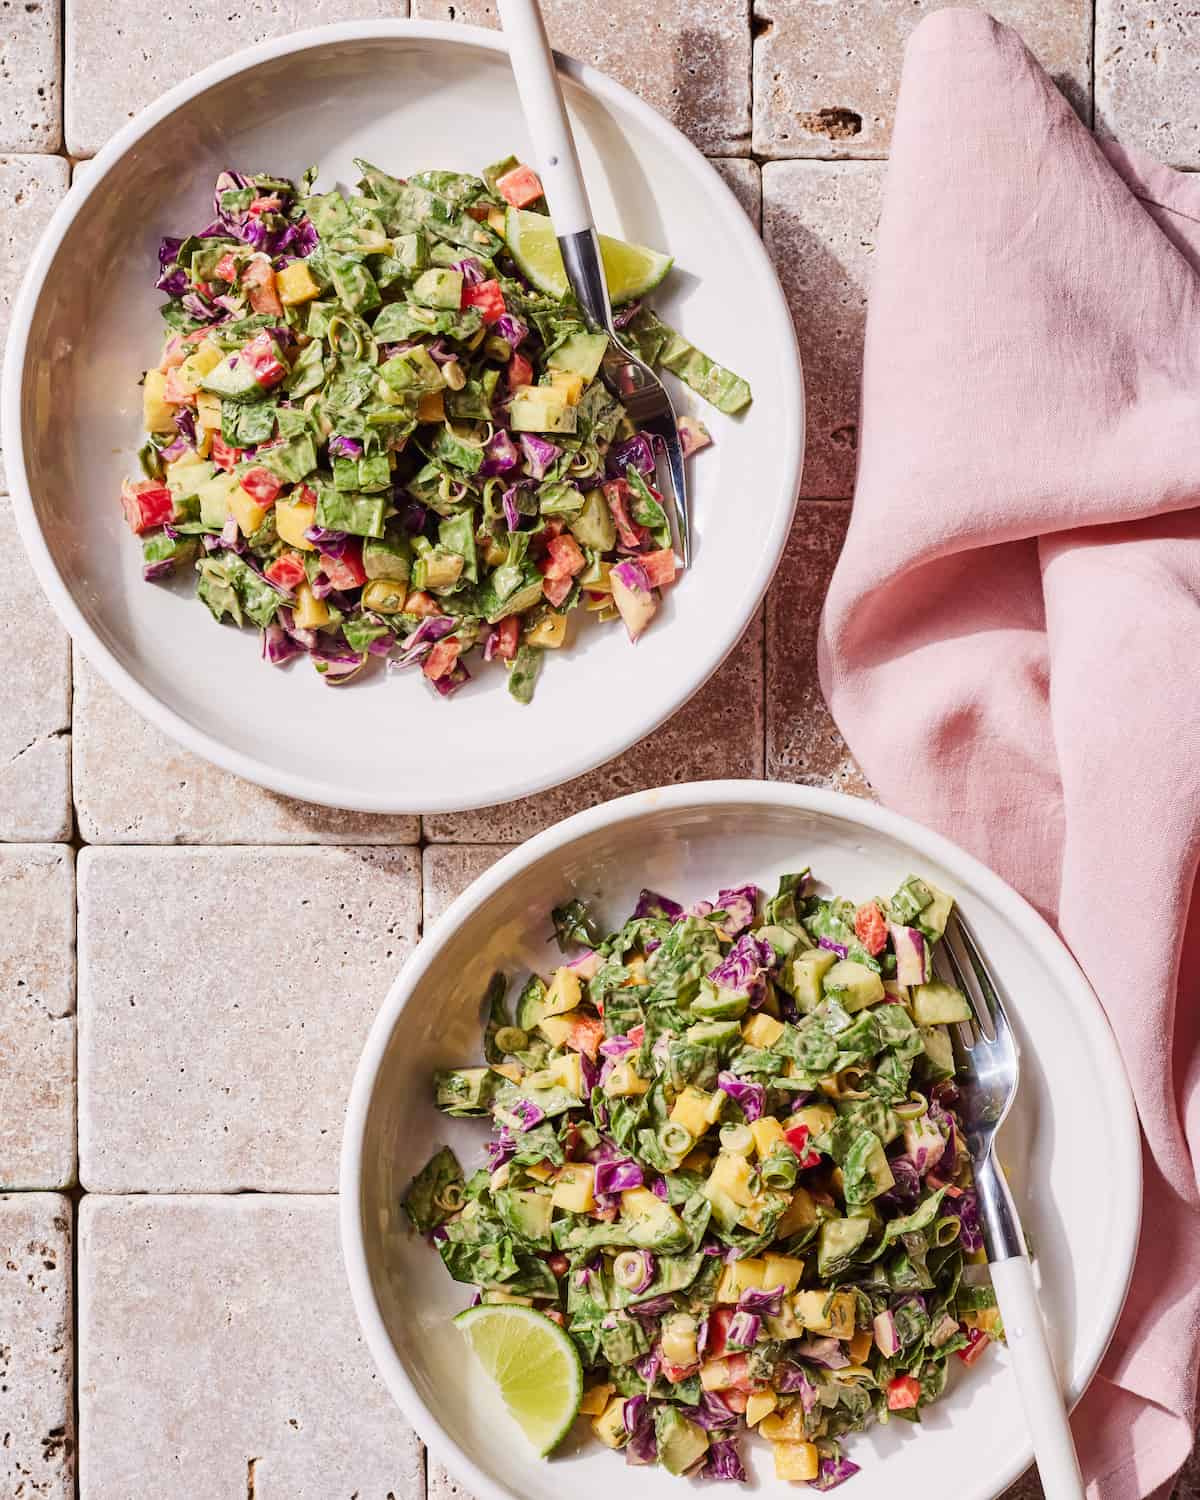 Two white low bowls of mango cucumber chopped salad, with a fork and a lime wedge in each bowl, placed on a beige tiled surface with a pink cloth napkin on the side.